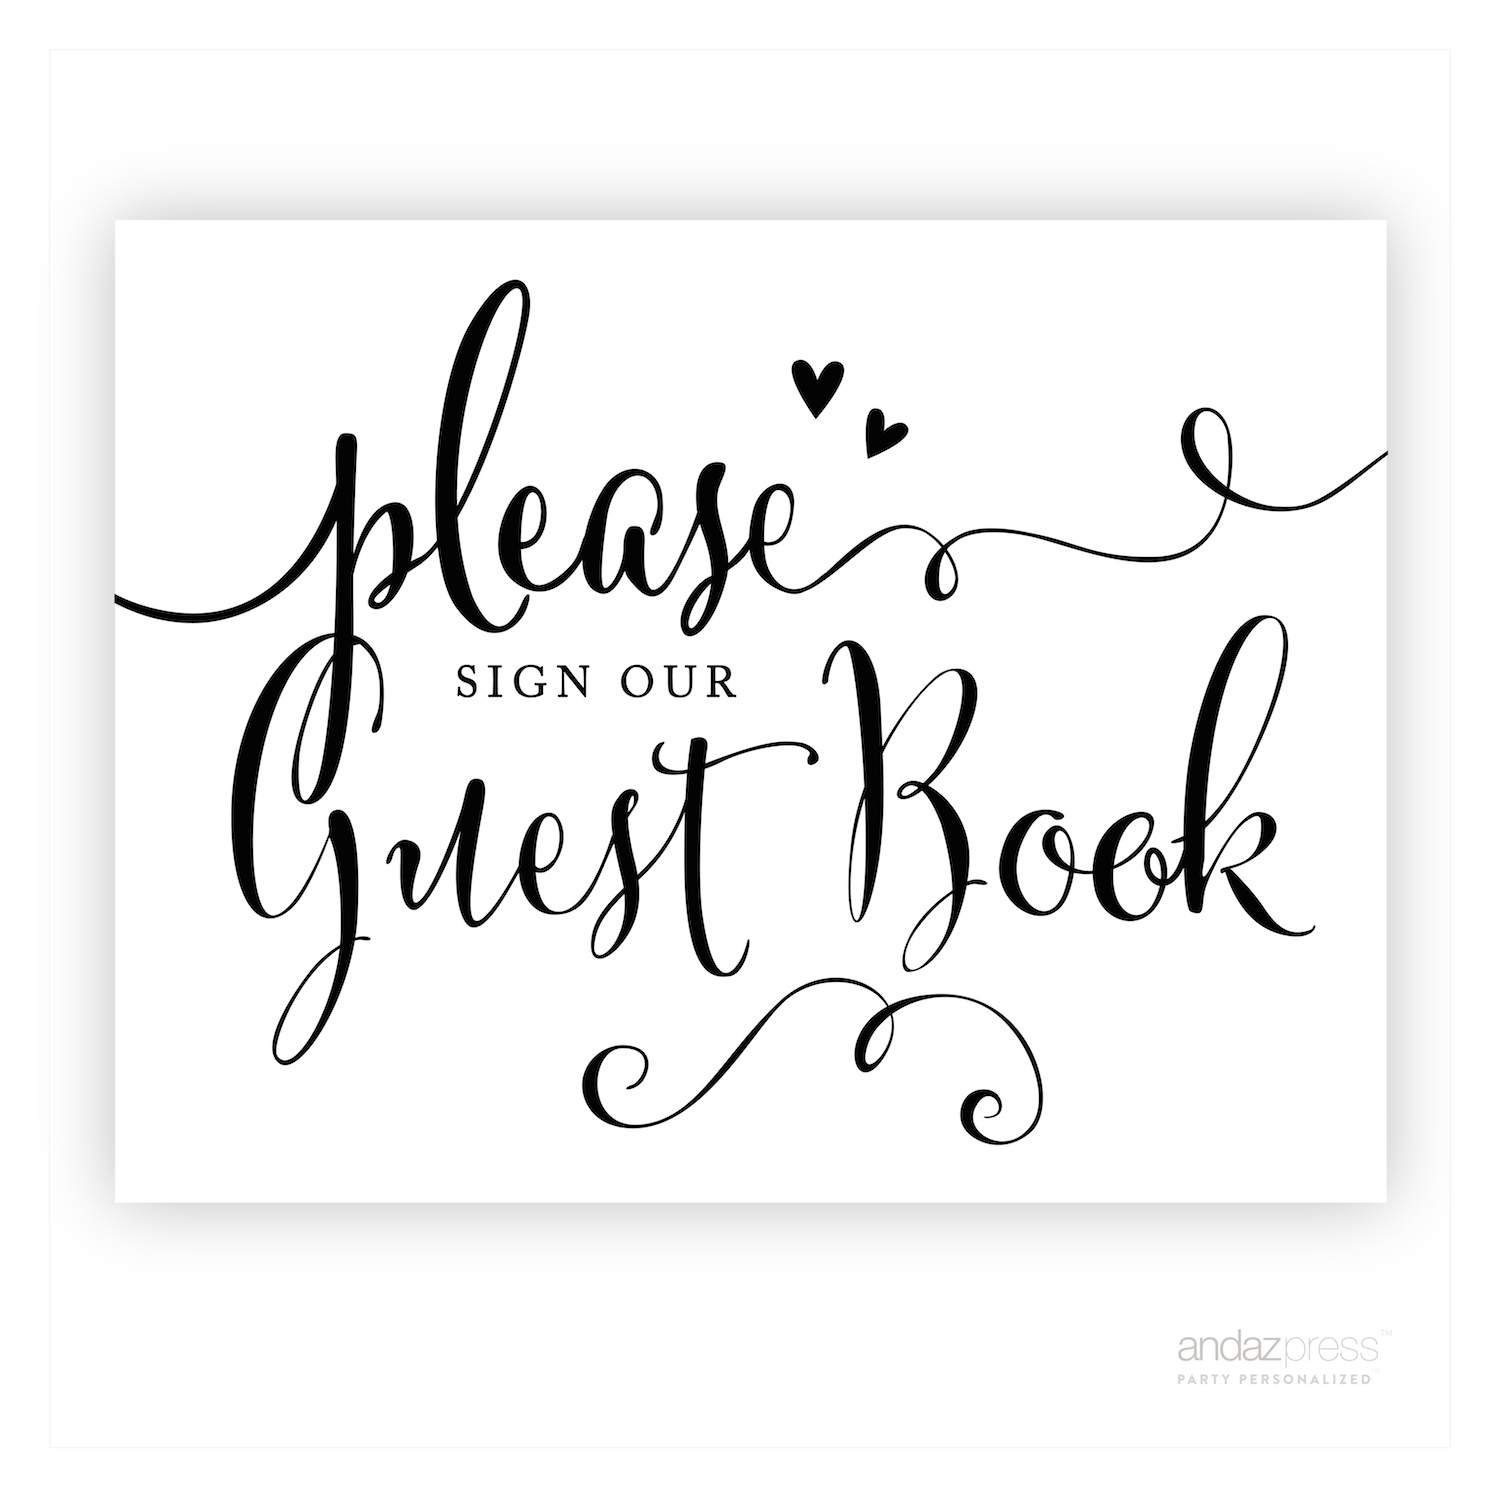 Andaz Press Wedding Ceremony And Reception Party Signs – Bride - Please Sign Our Guestbook Free Printable